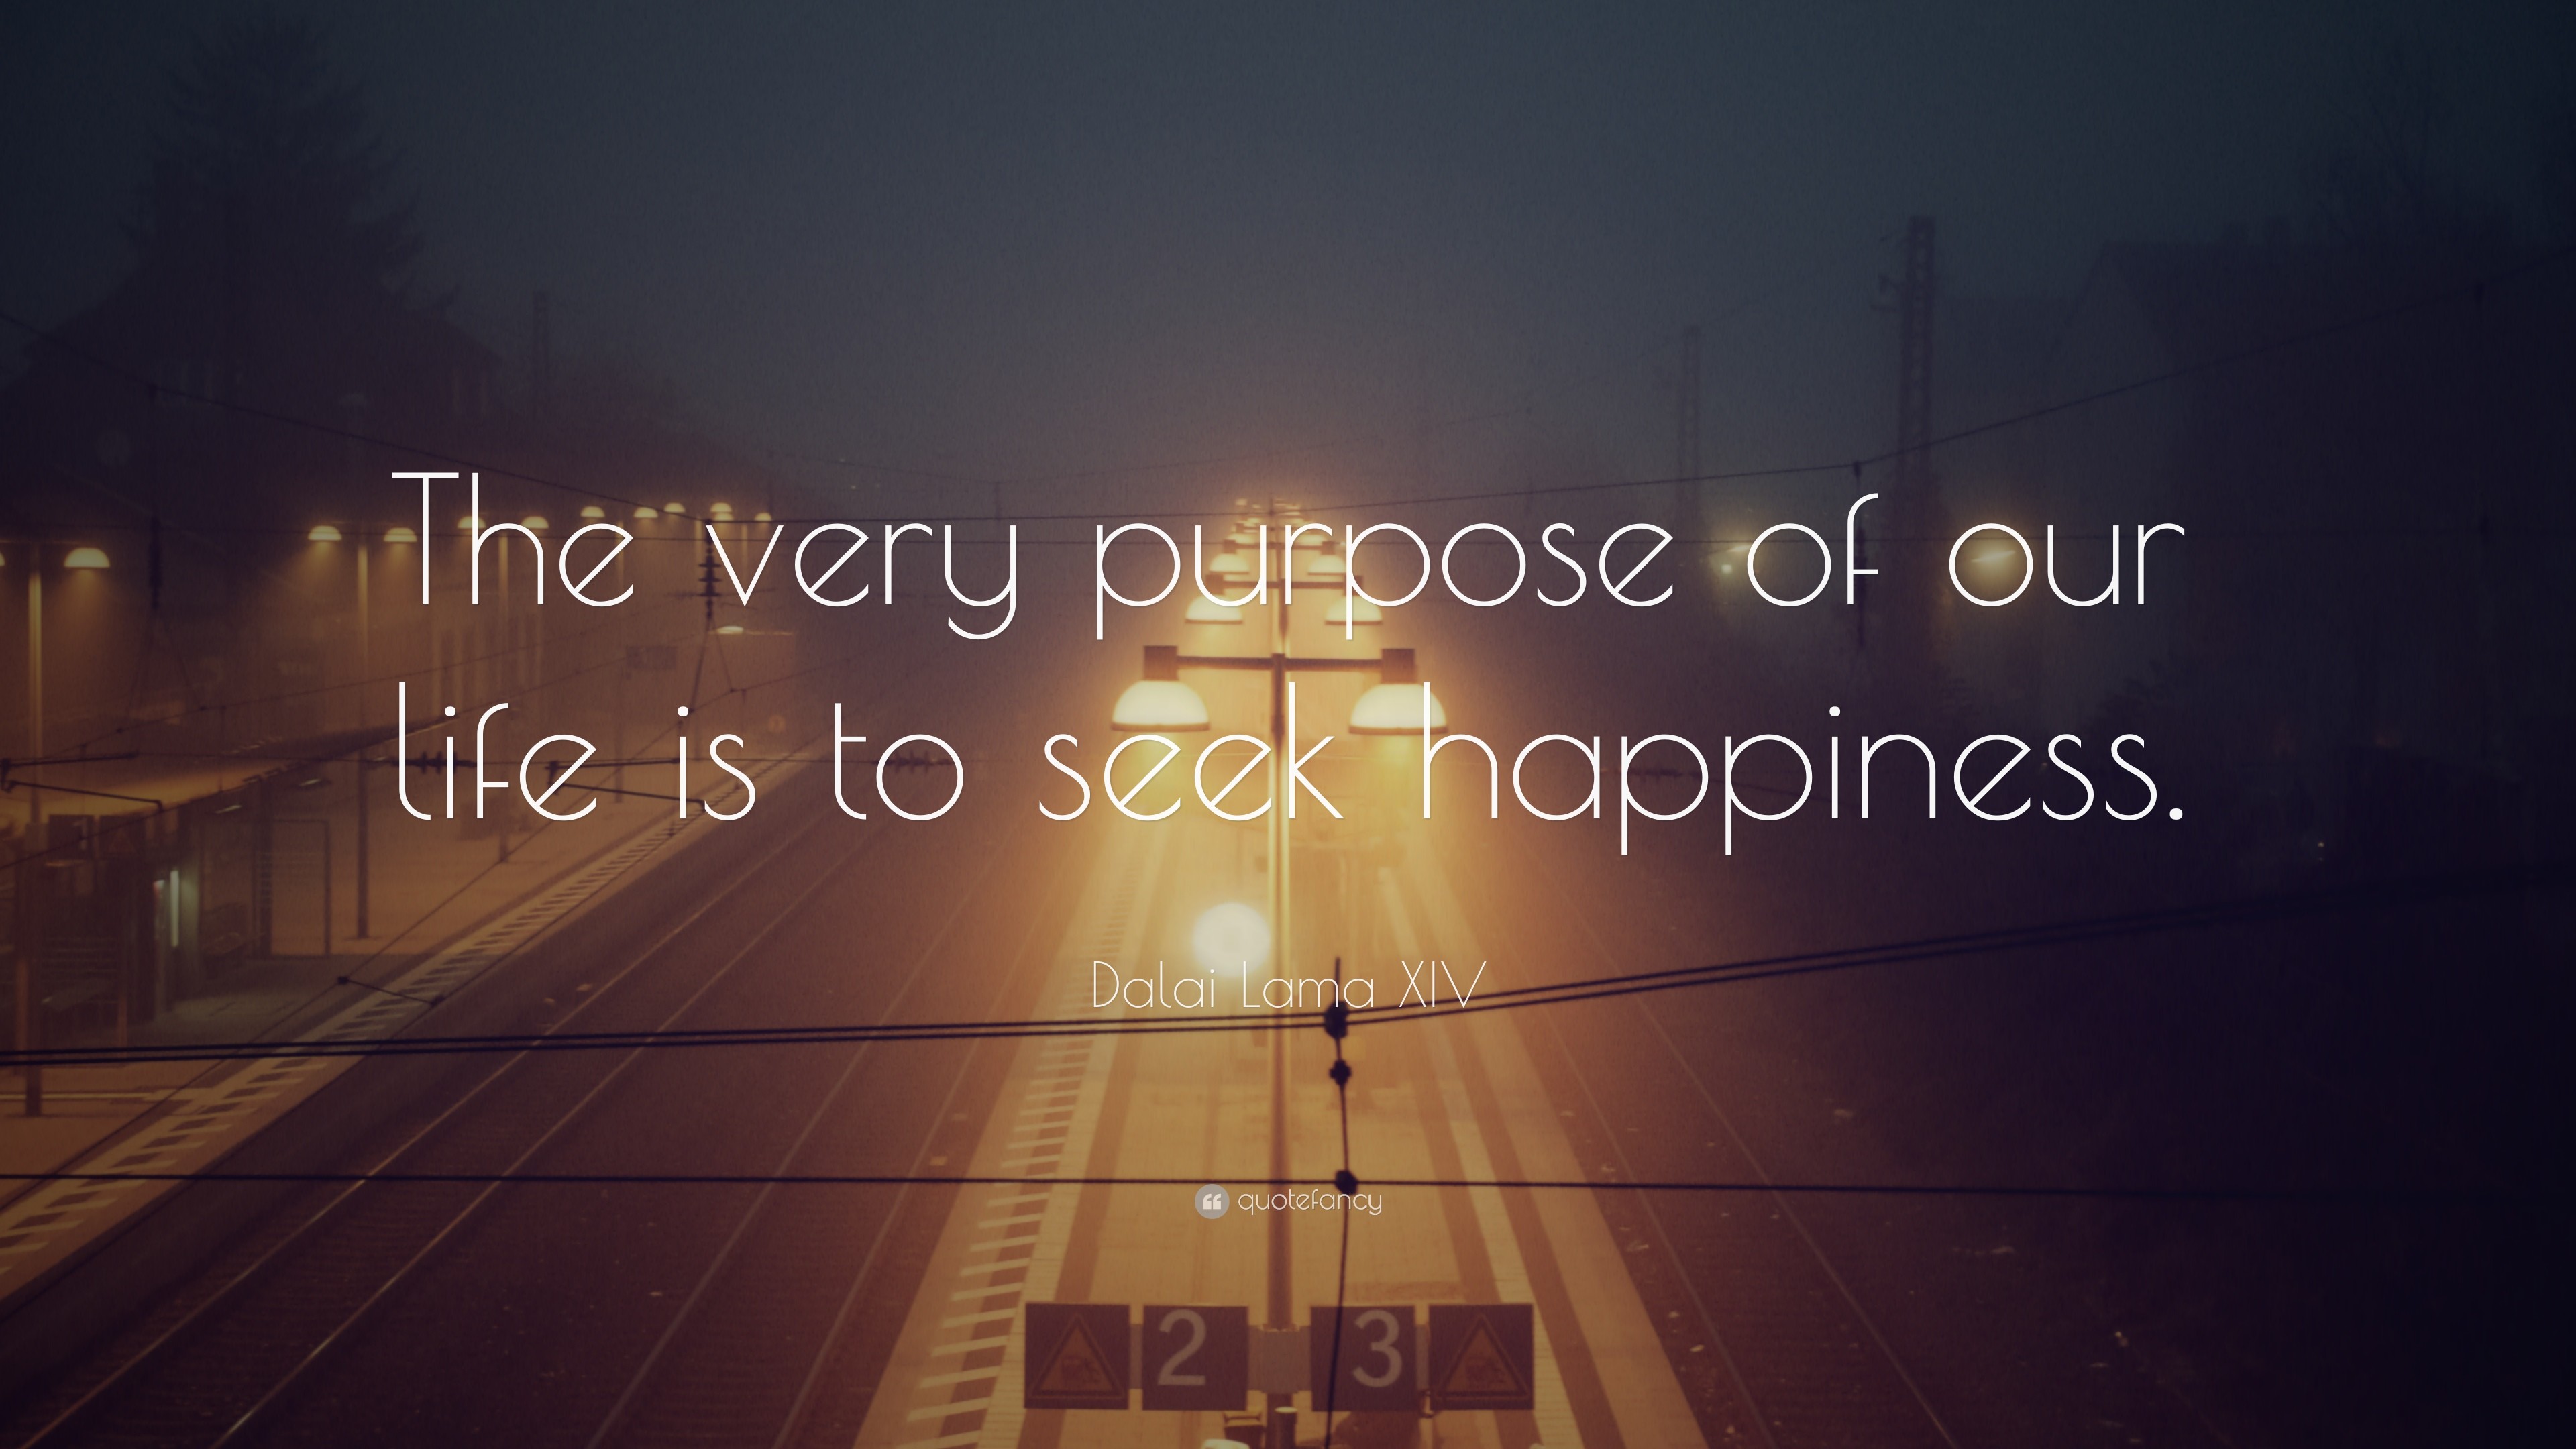 3840x2160 Dalai Lama XIV Quote: “The very purpose of our life is to seek happiness